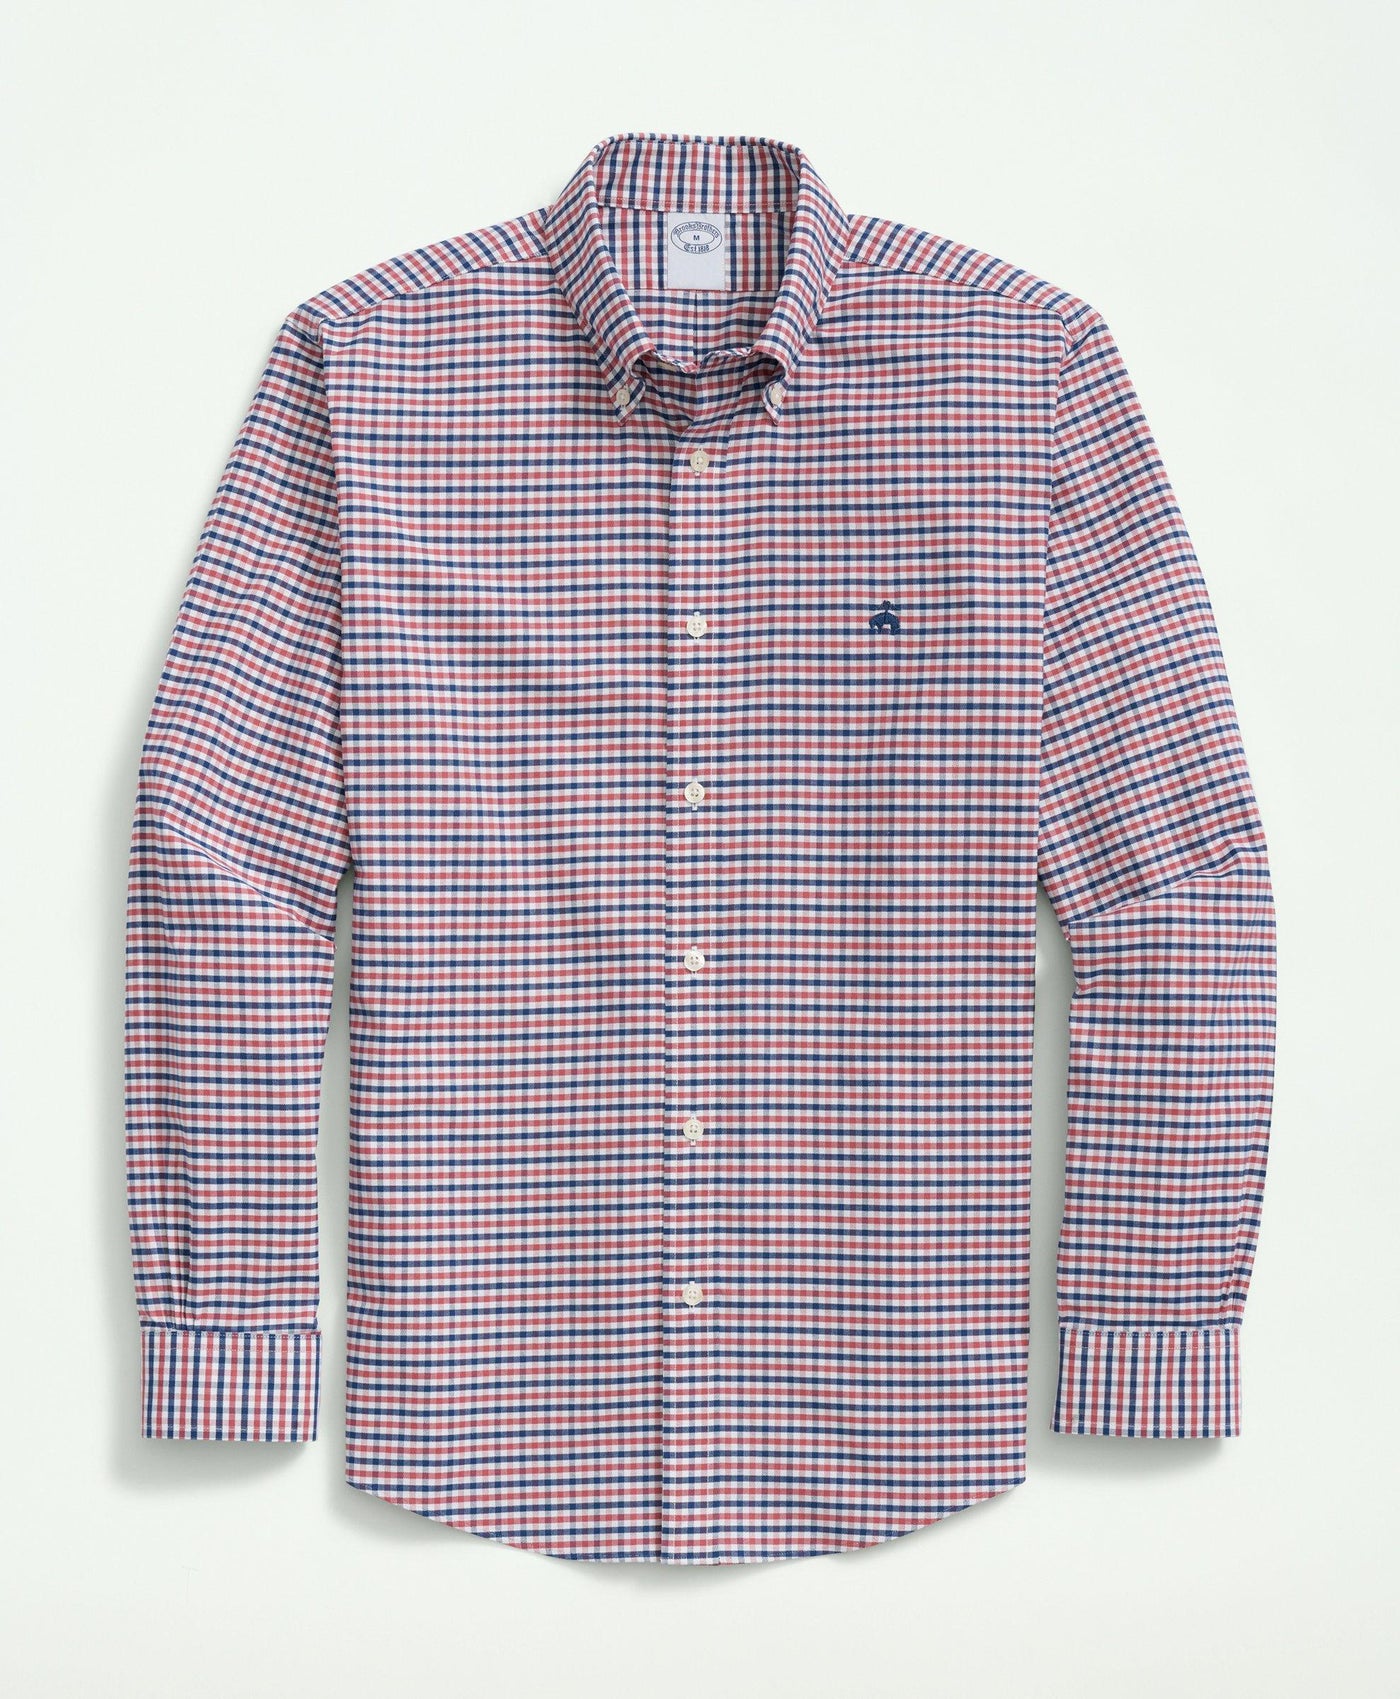 Stretch Regent Regular-Fit Cotton Non-Iron Oxford Polo Button-Down Collar, Gingham Shirt